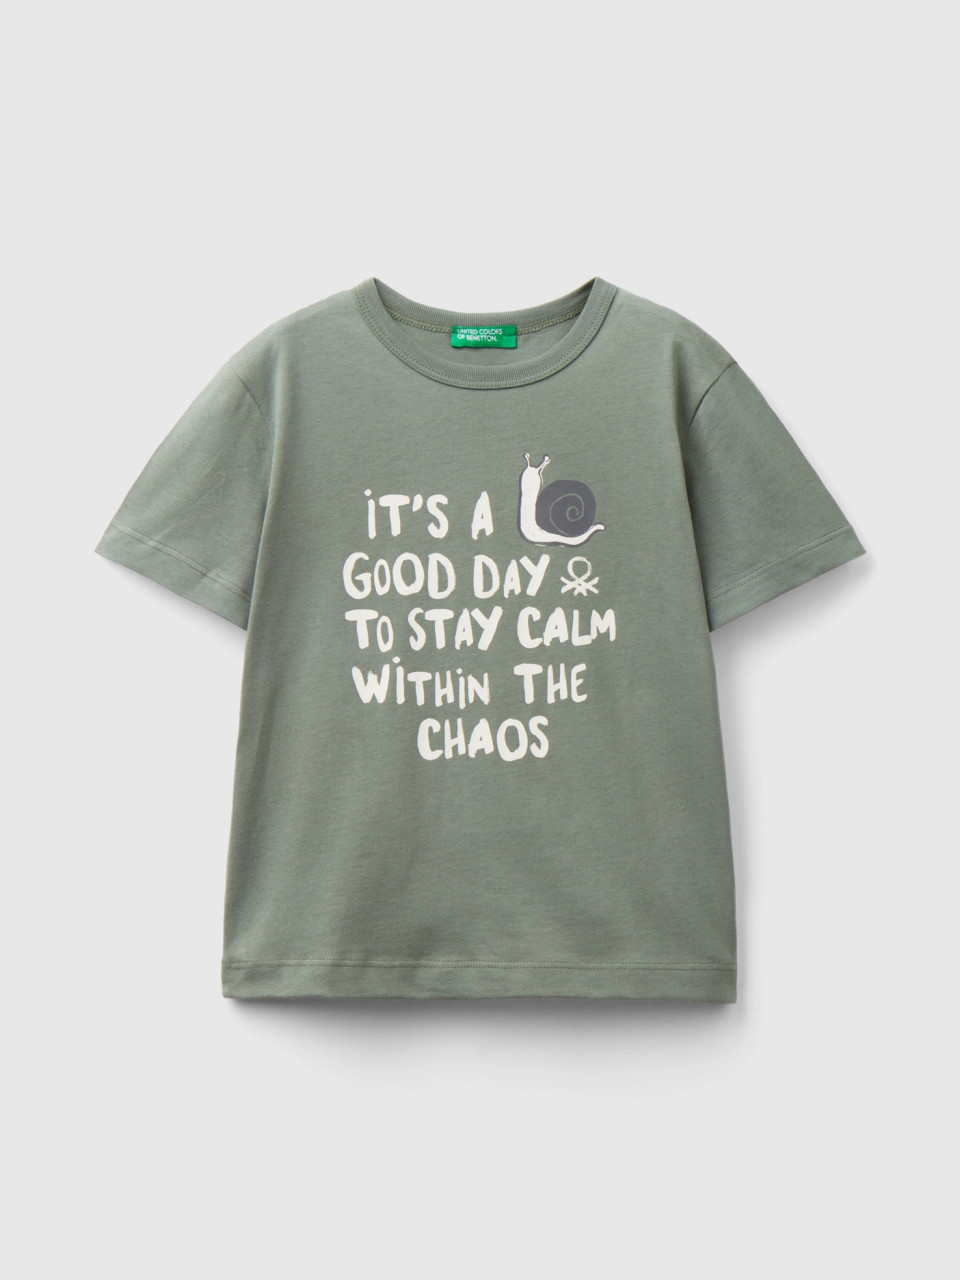 Benetton, T-shirt In Organic Cotton With Print, Military Green, Kids